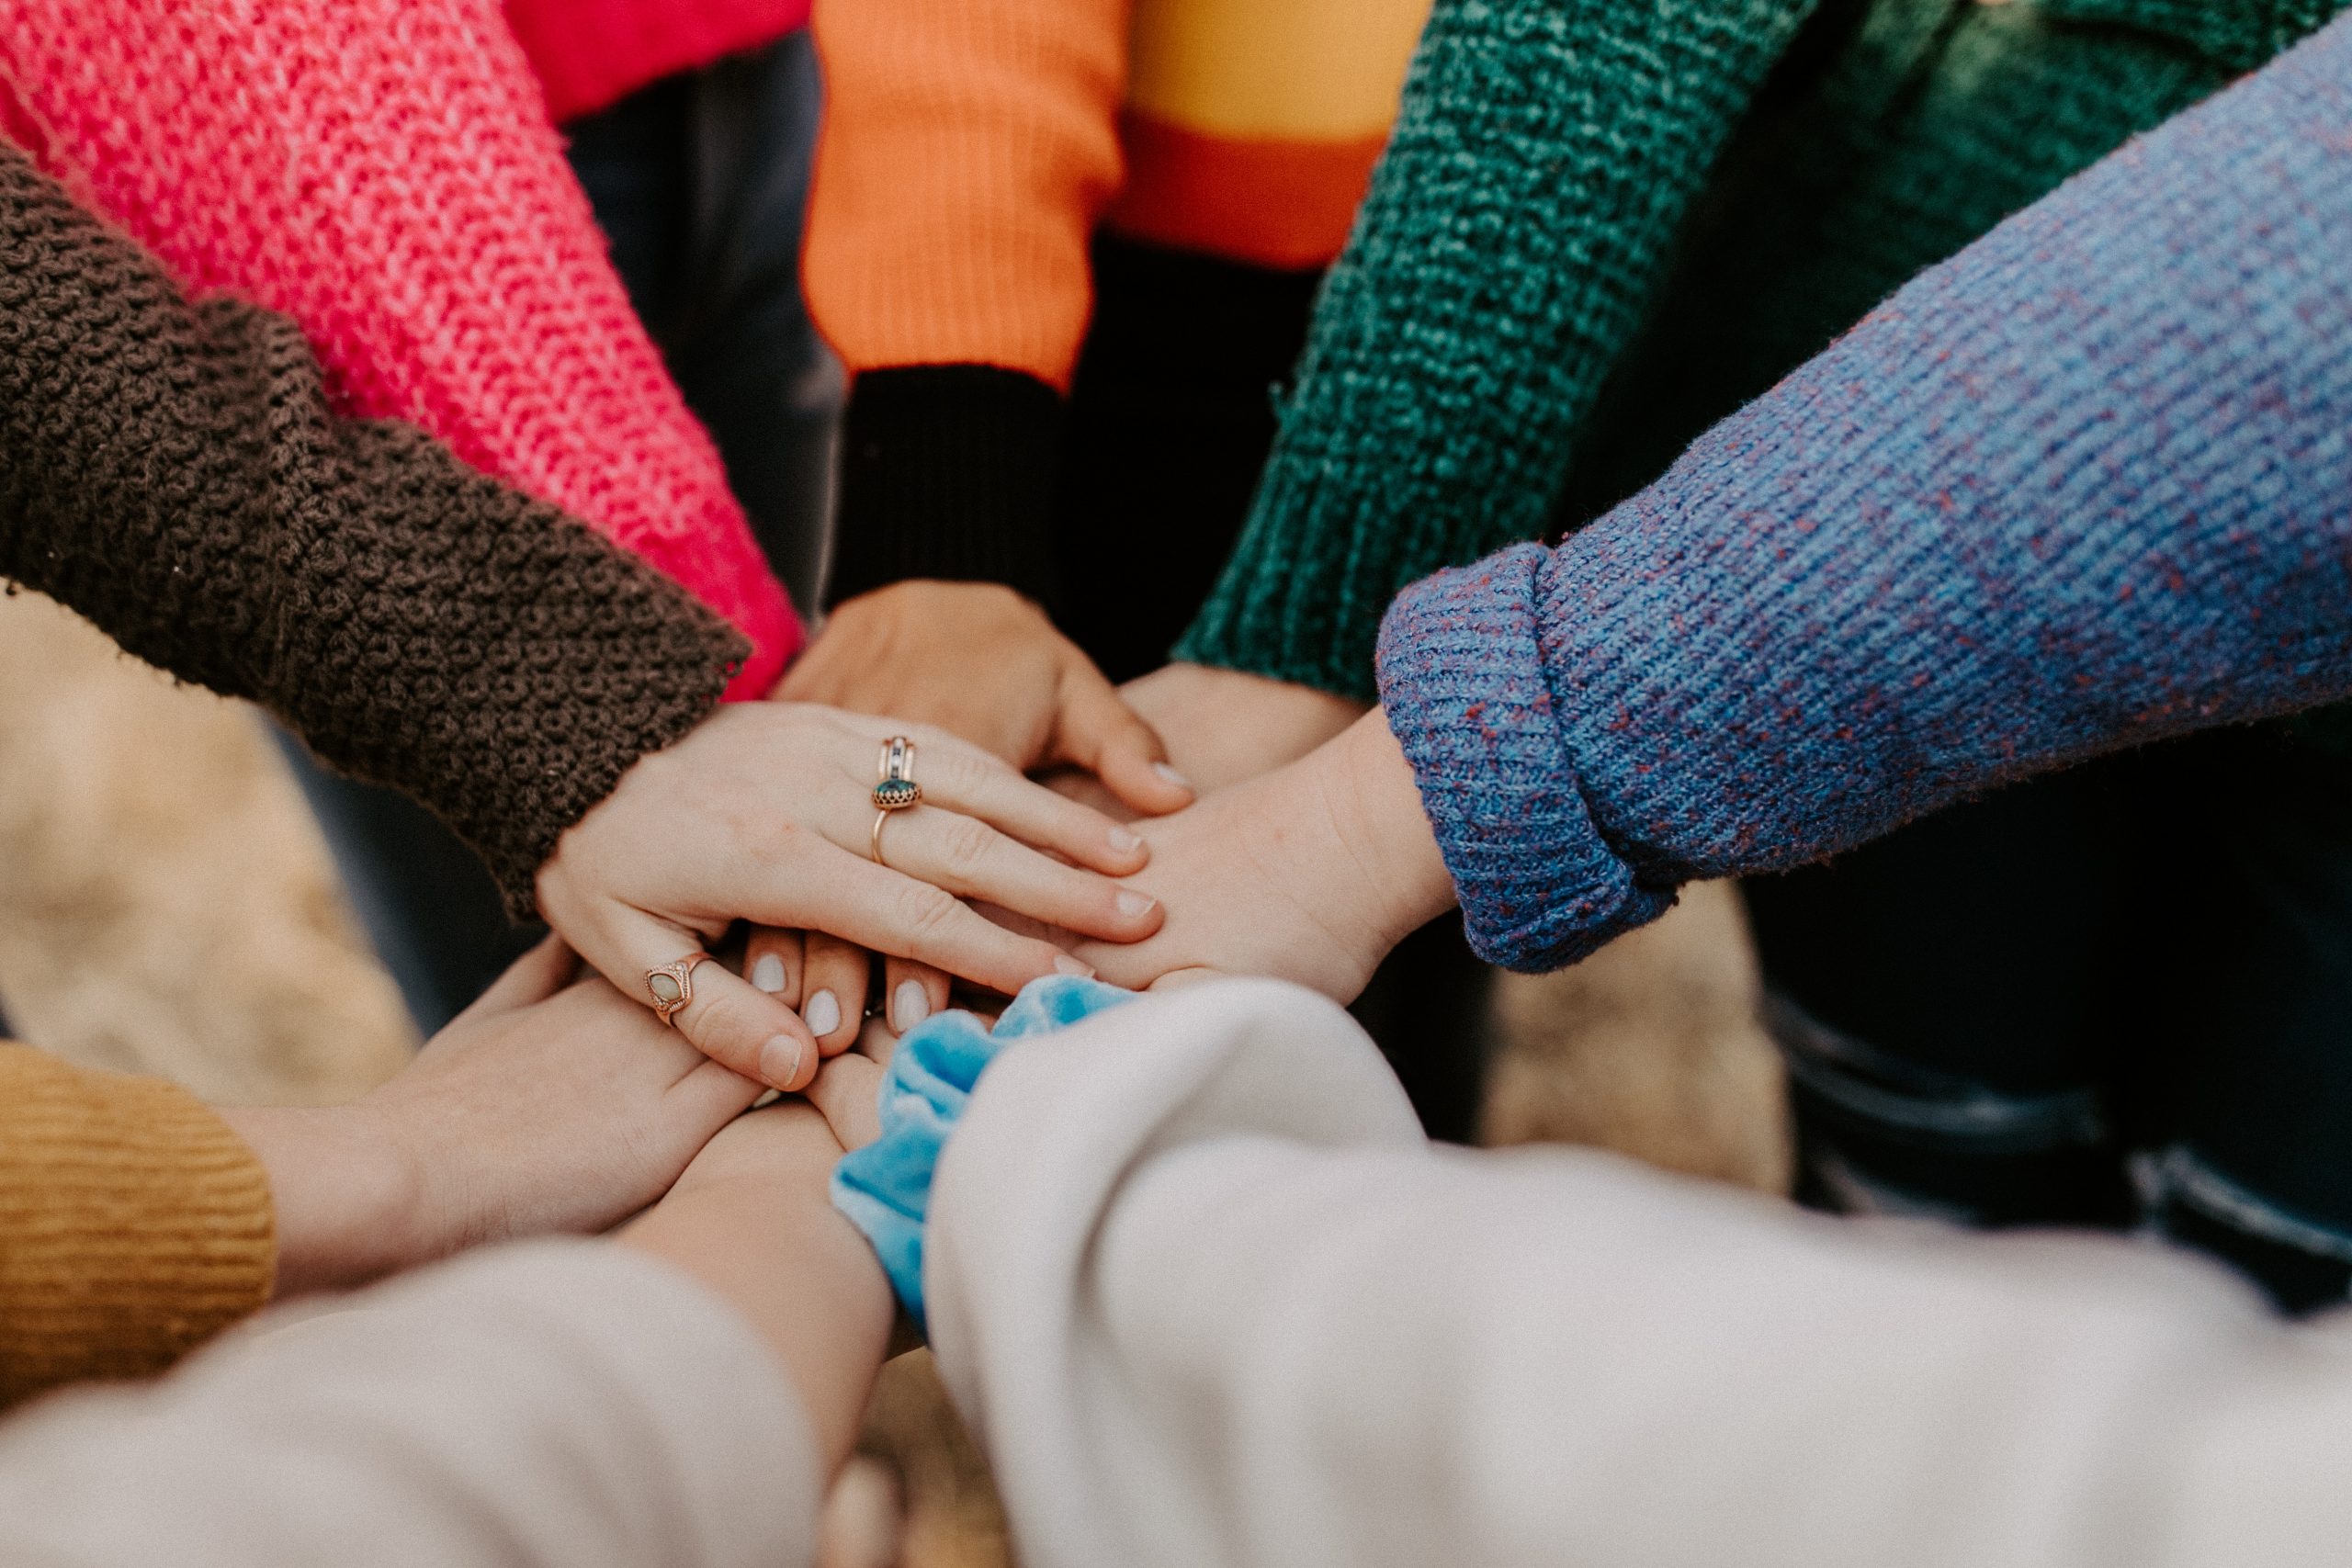 A group of people, each wearing different colorful sweaters, place their hands together in the center of the image, symbolizing unity and teamwork. With the background blurred to highlight the vibrant sweaters and hands, this scene captures the spirit of community at Khiron Clinics where mental health treatment is our priority.